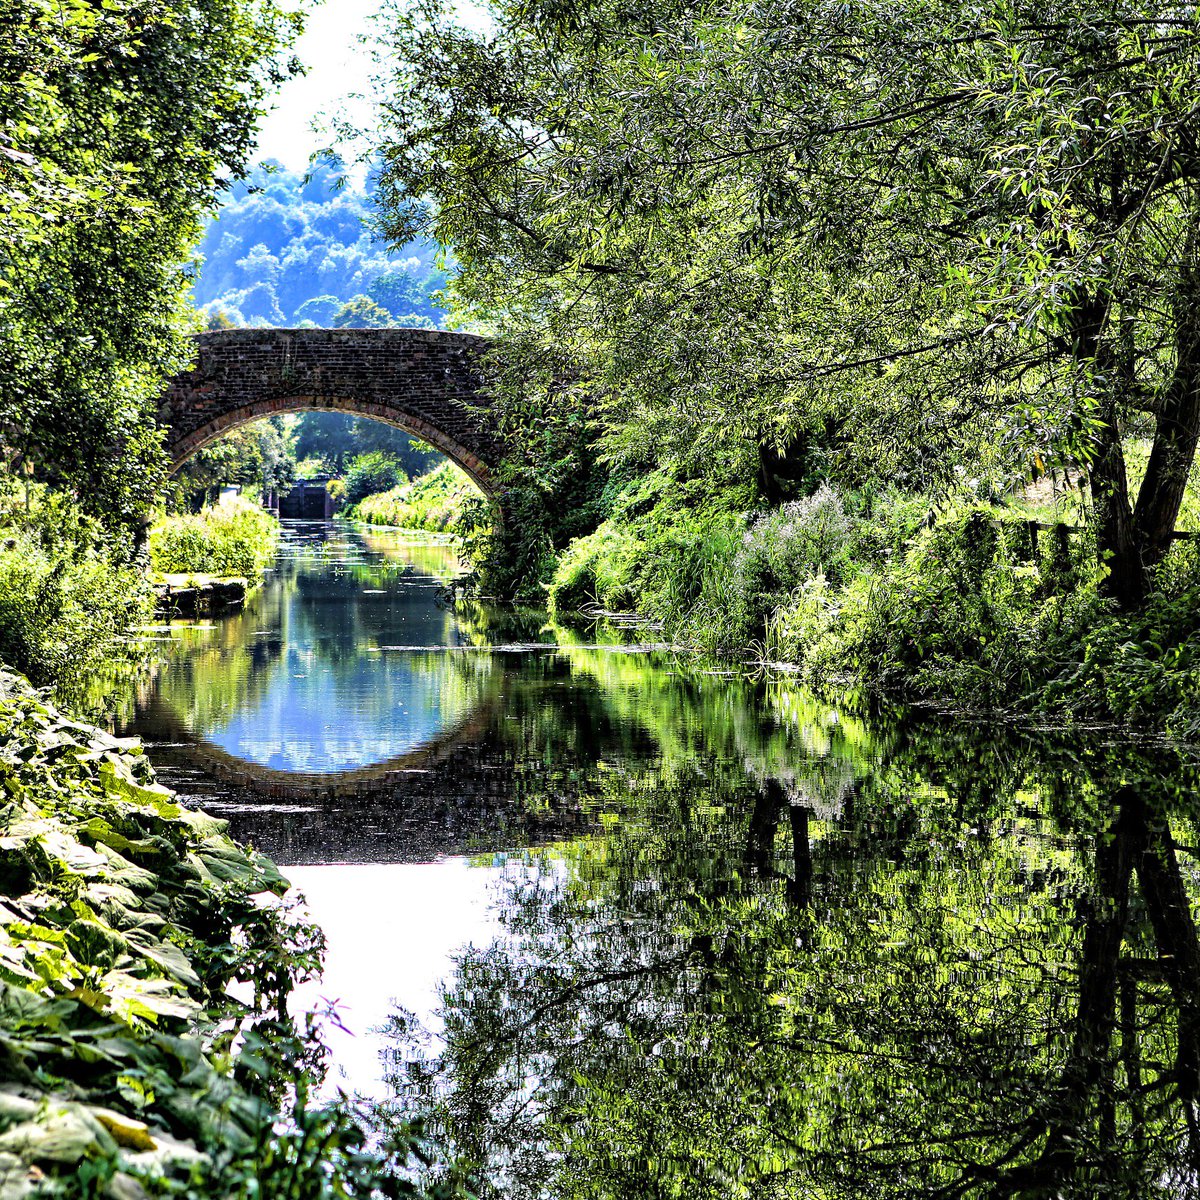 ‘Perfect Reflections’ by Mike Gallagher in this image of Stanton’s Bridge, Bowbridge on the Thames and Severn Canal 👌
#reflection #reflectionphotography #reflectionphoto #stantonsbridge #postcards #picturepostcards #canals #stroudcanal #sapperton #riversevern #riverthames